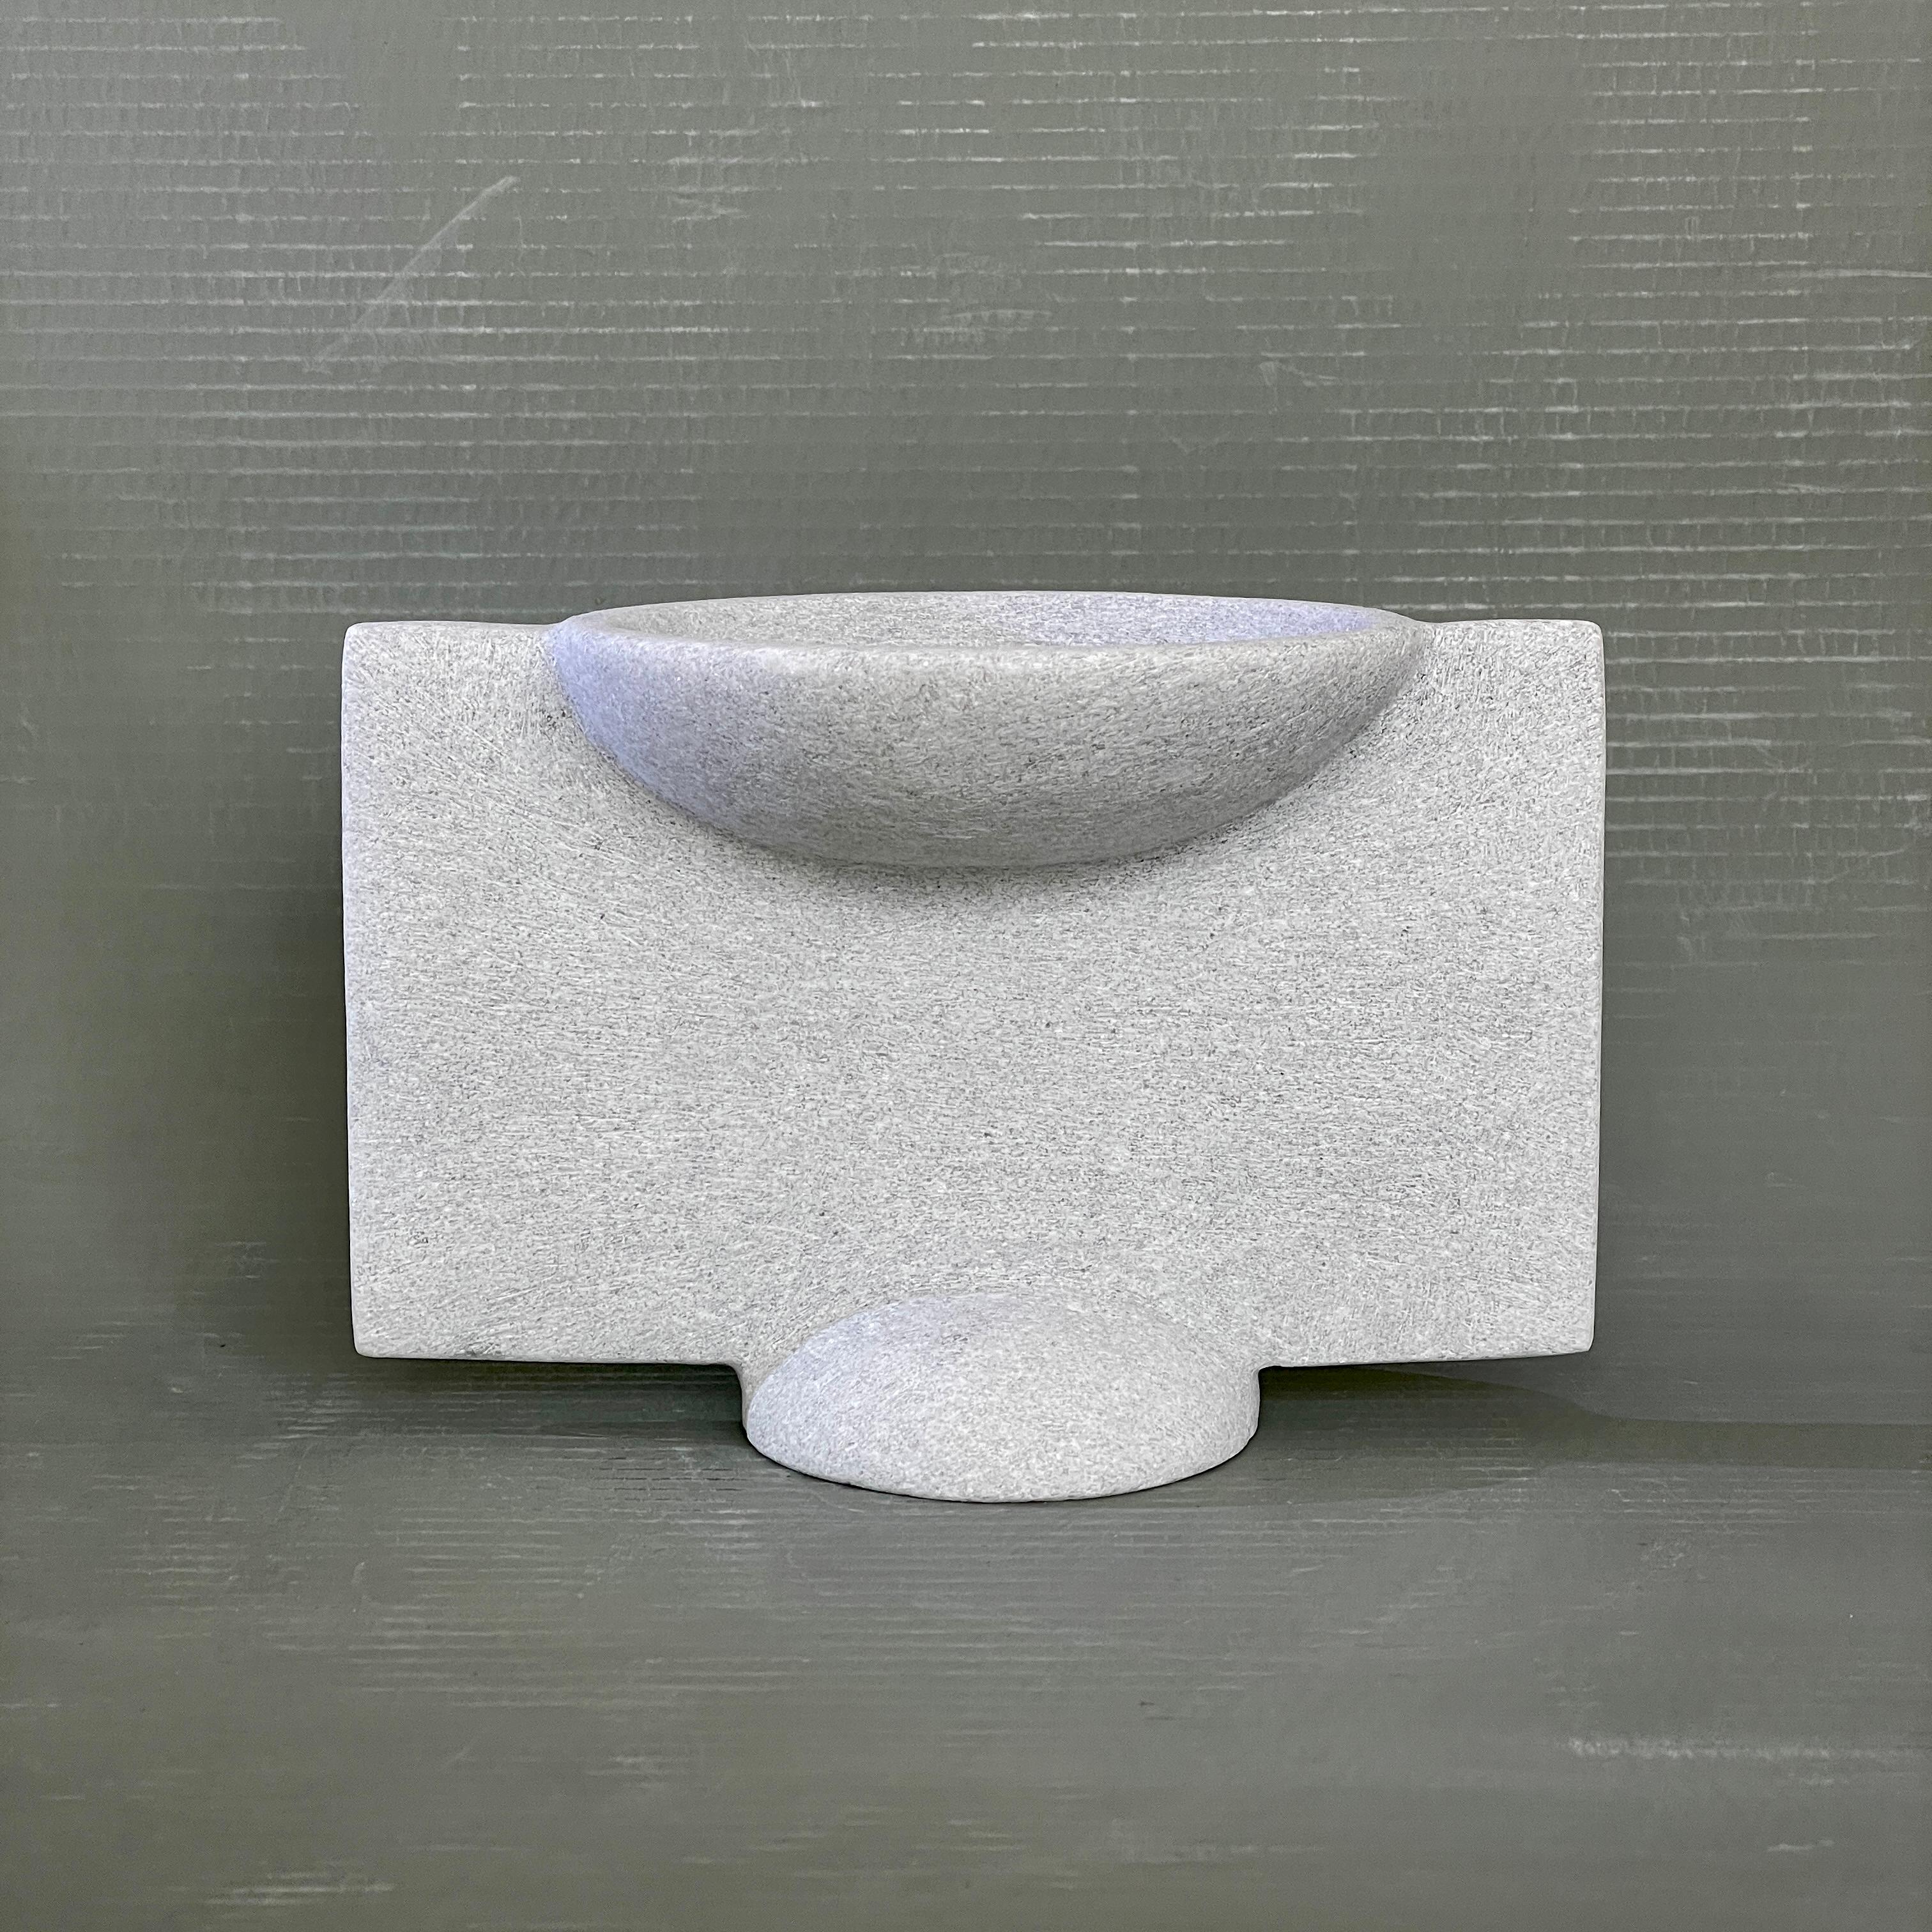 Hand carved marble vessel by Tom Von Kaenel
Materials: marble
Dimensions: W13 x D24 x H18 cm

Tom von Kaenel, sculptor and painter, was born in Switzerland in 1961. Already in his early
childhood he was deeply devoted to art. His desire to